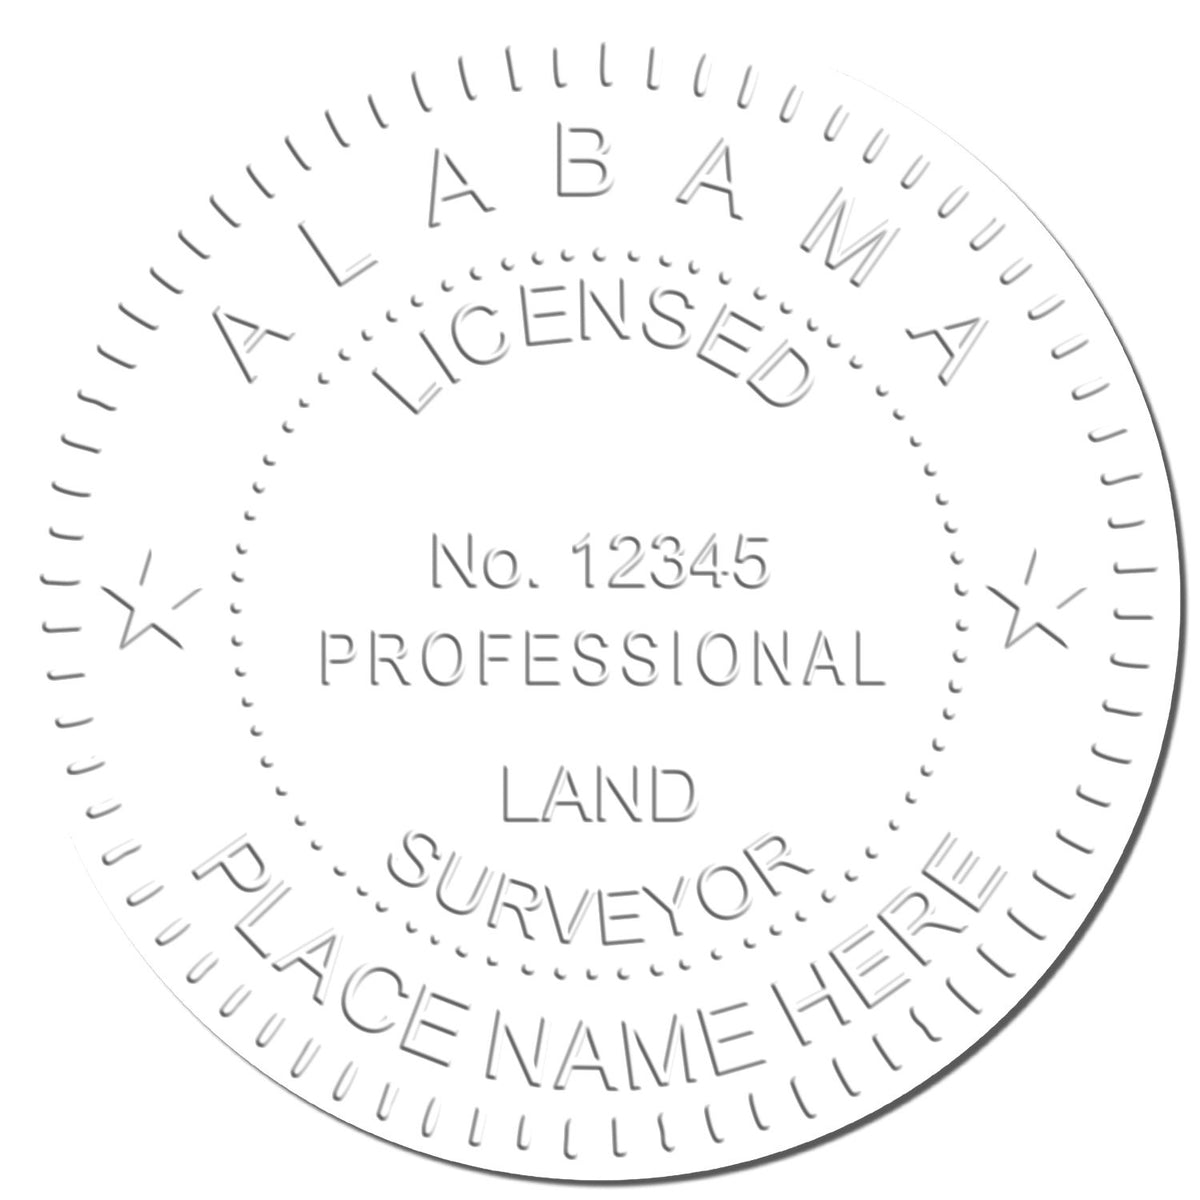 This paper is stamped with a sample imprint of the Alabama Desk Surveyor Seal Embosser, signifying its quality and reliability.